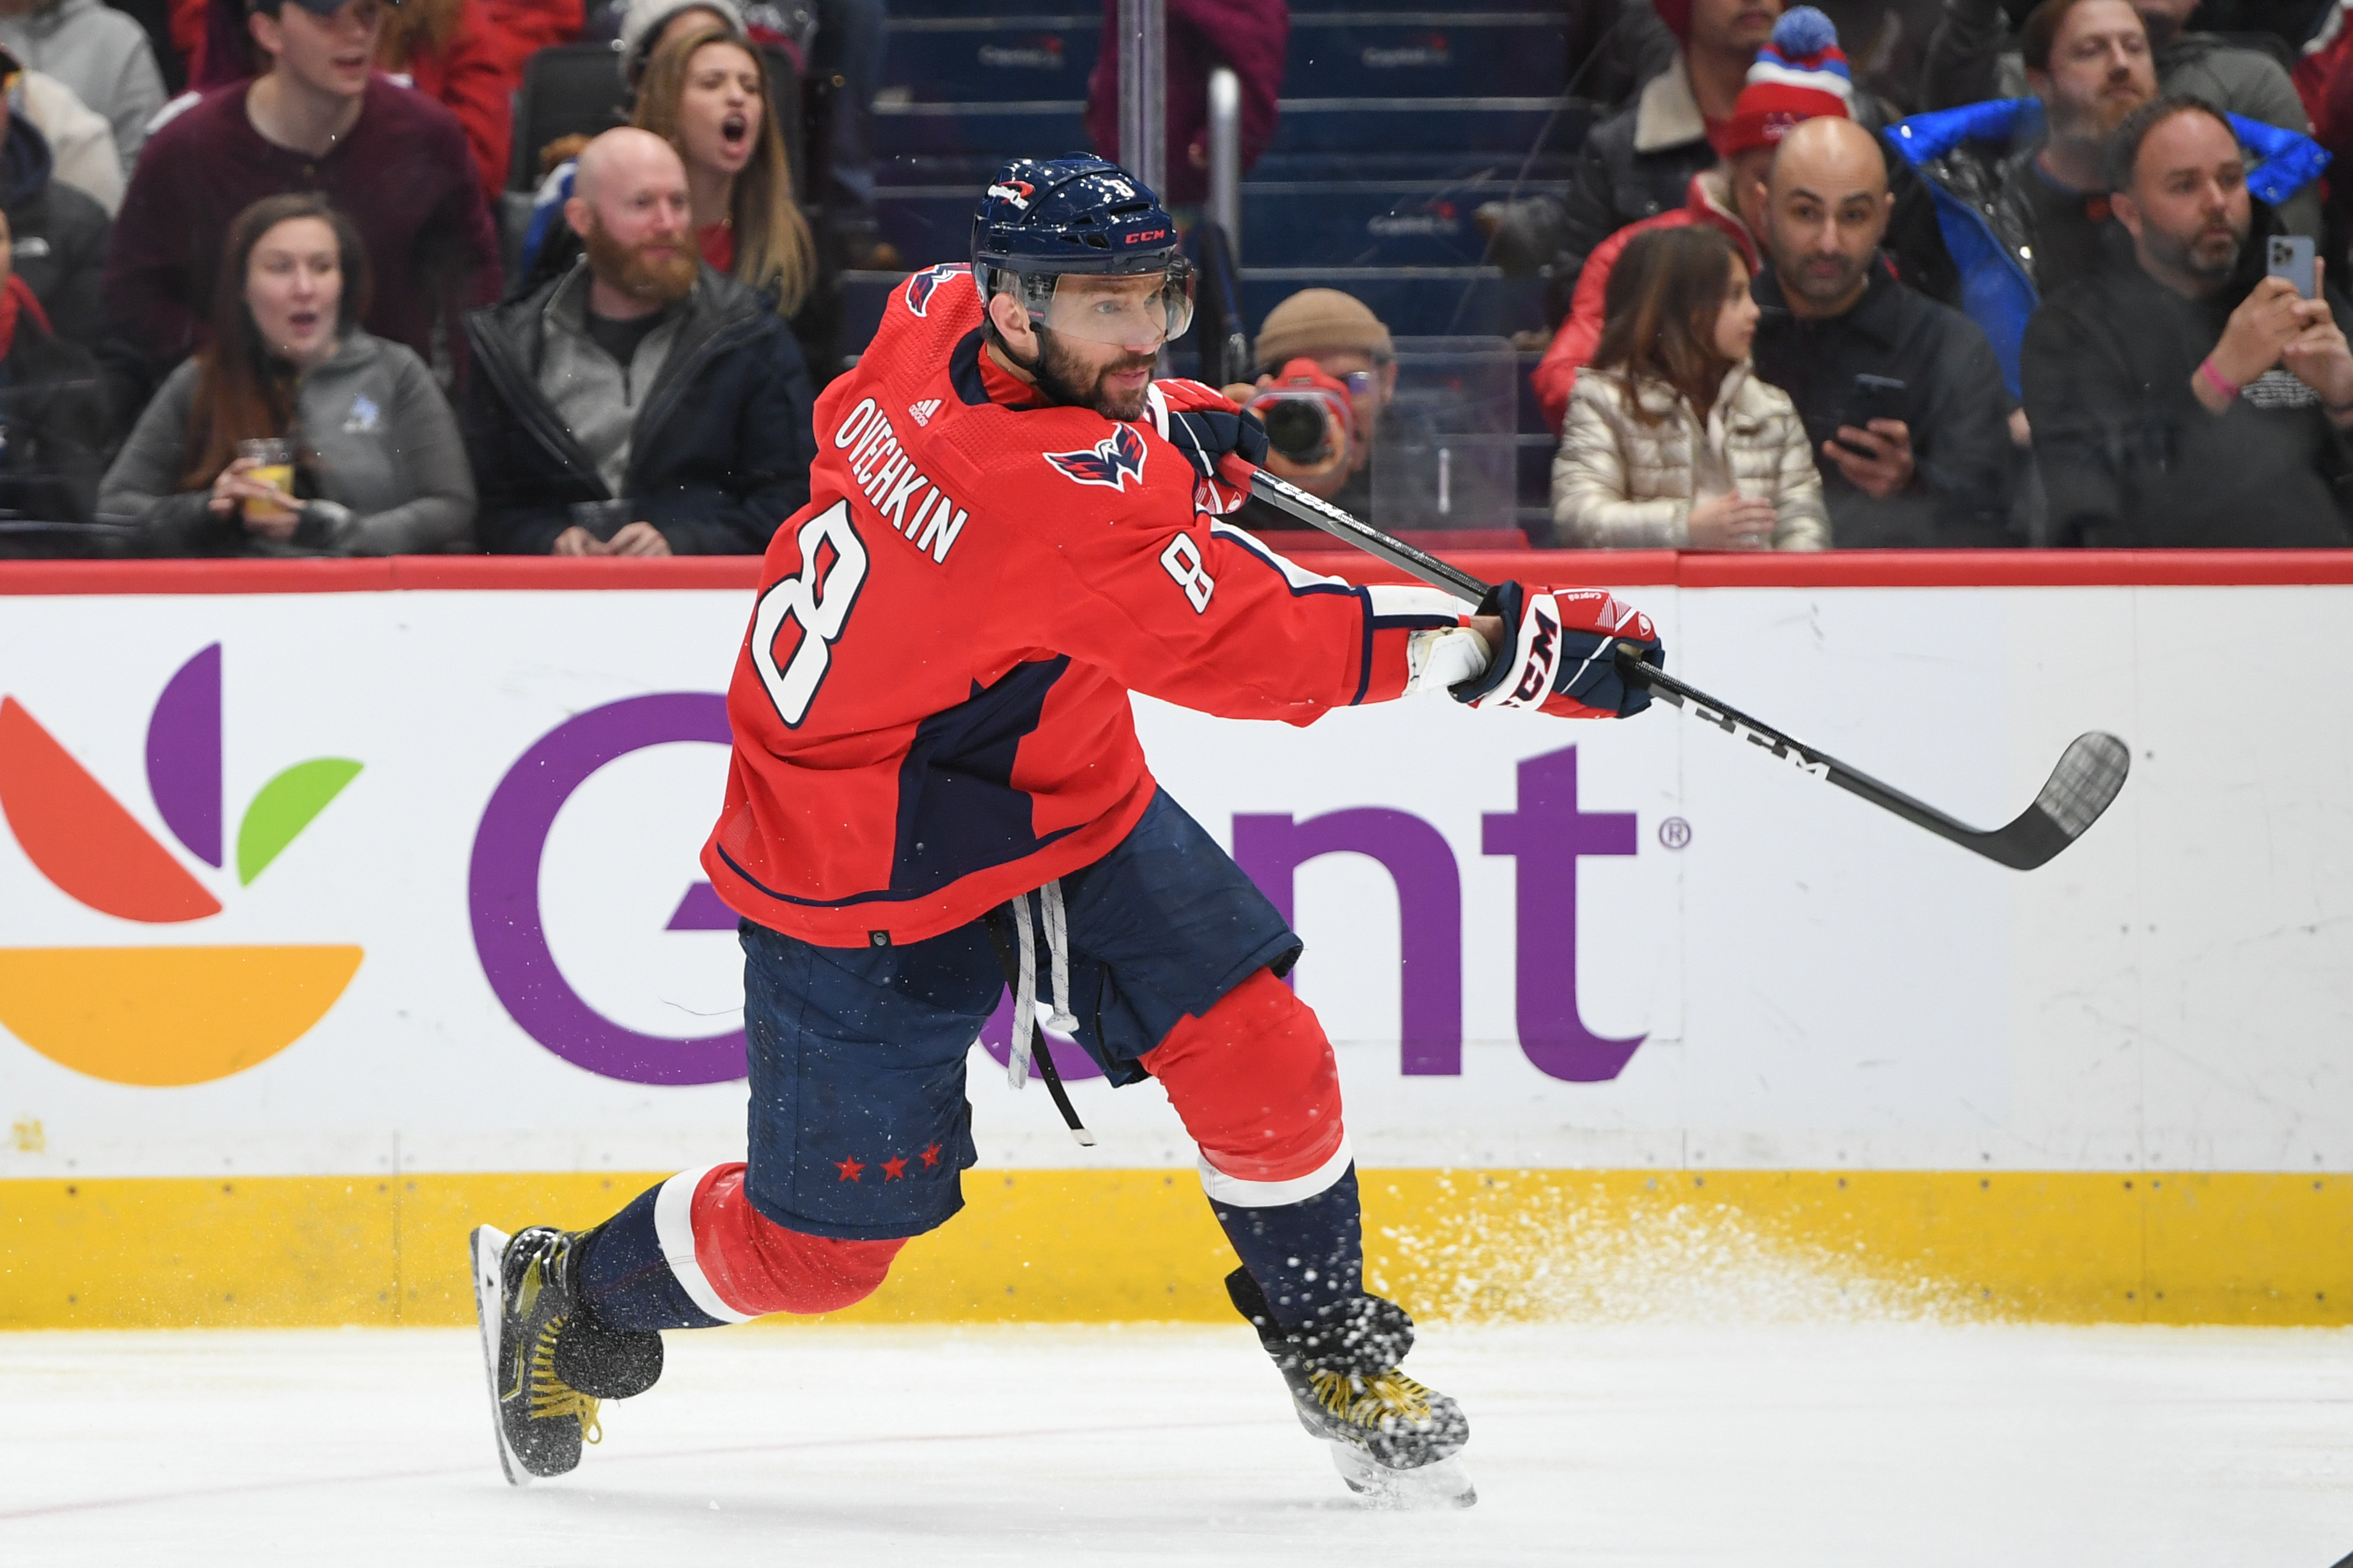 Ovechkin at 800 now chasing Howe for 2nd on NHL goals list